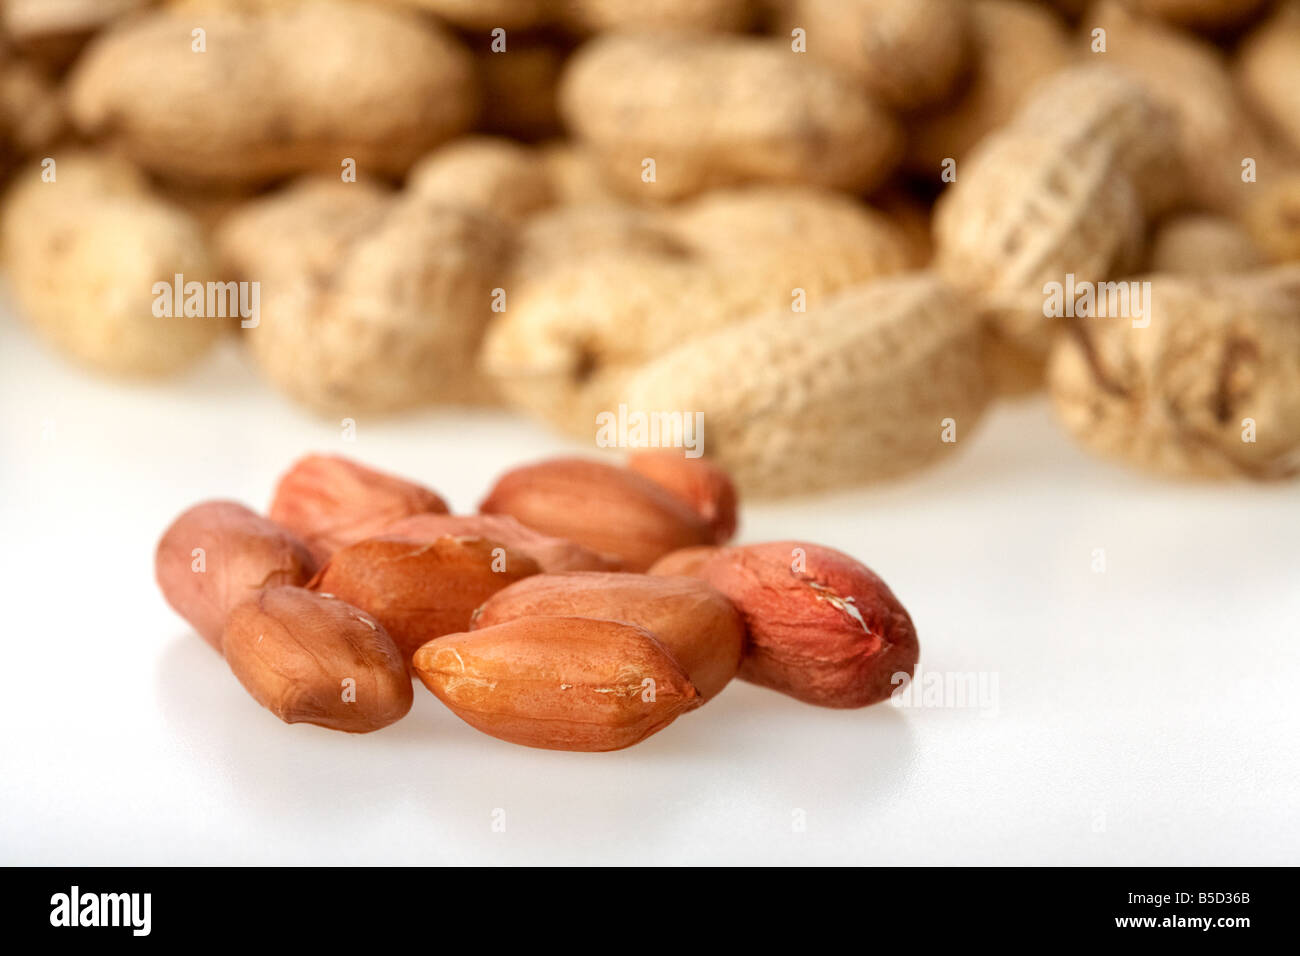 pile of peanuts in their shells and some shelled nuts Stock Photo